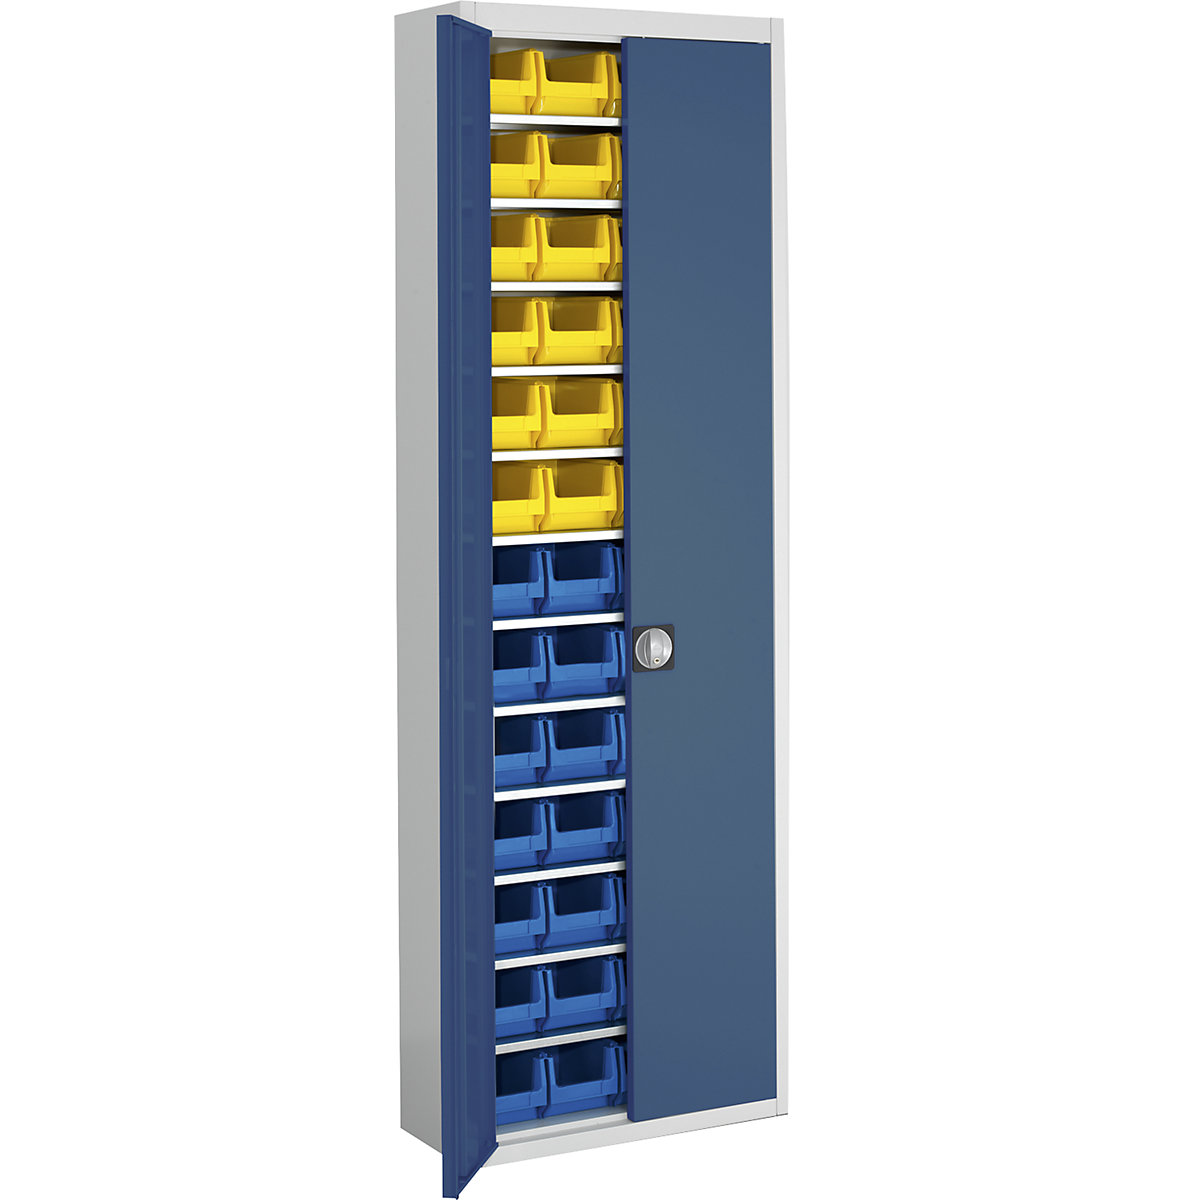 Storage cupboard with open fronted storage bins – mauser, HxWxD 2150 x 680 x 280 mm, two-colour, grey body, blue doors, 52 bins-10